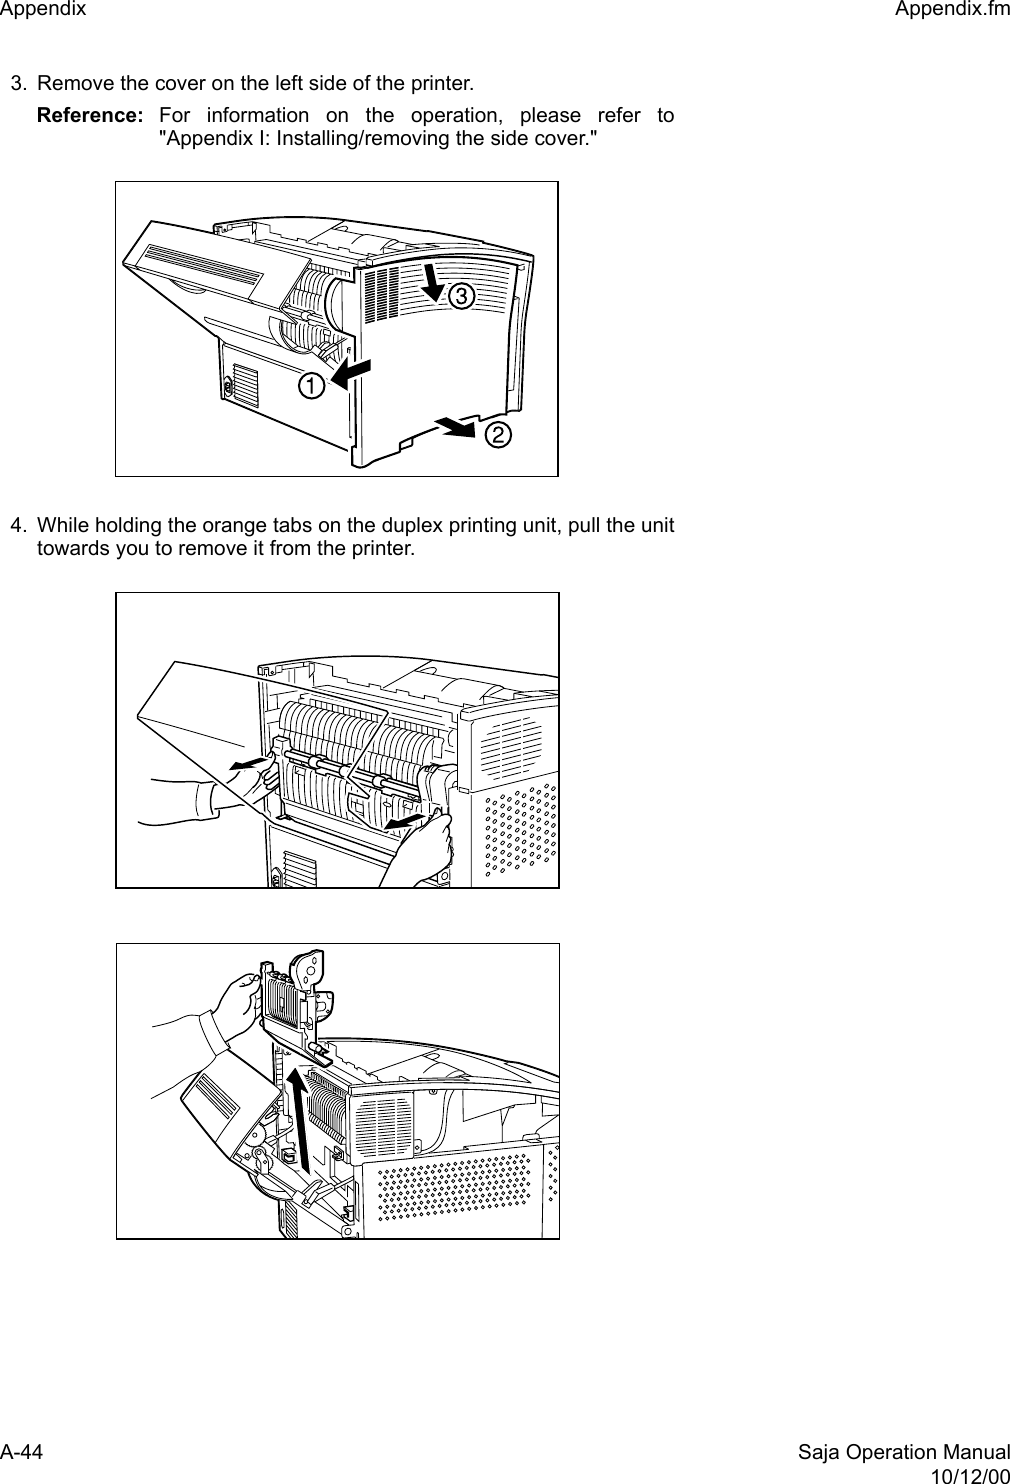 A-44 Saja Operation Manual10/12/00Appendix  Appendix.fm3. Remove the cover on the left side of the printer.Reference: For information on the operation, please refer to&quot;Appendix I: Installing/removing the side cover.&quot;4. While holding the orange tabs on the duplex printing unit, pull the unittowards you to remove it from the printer.